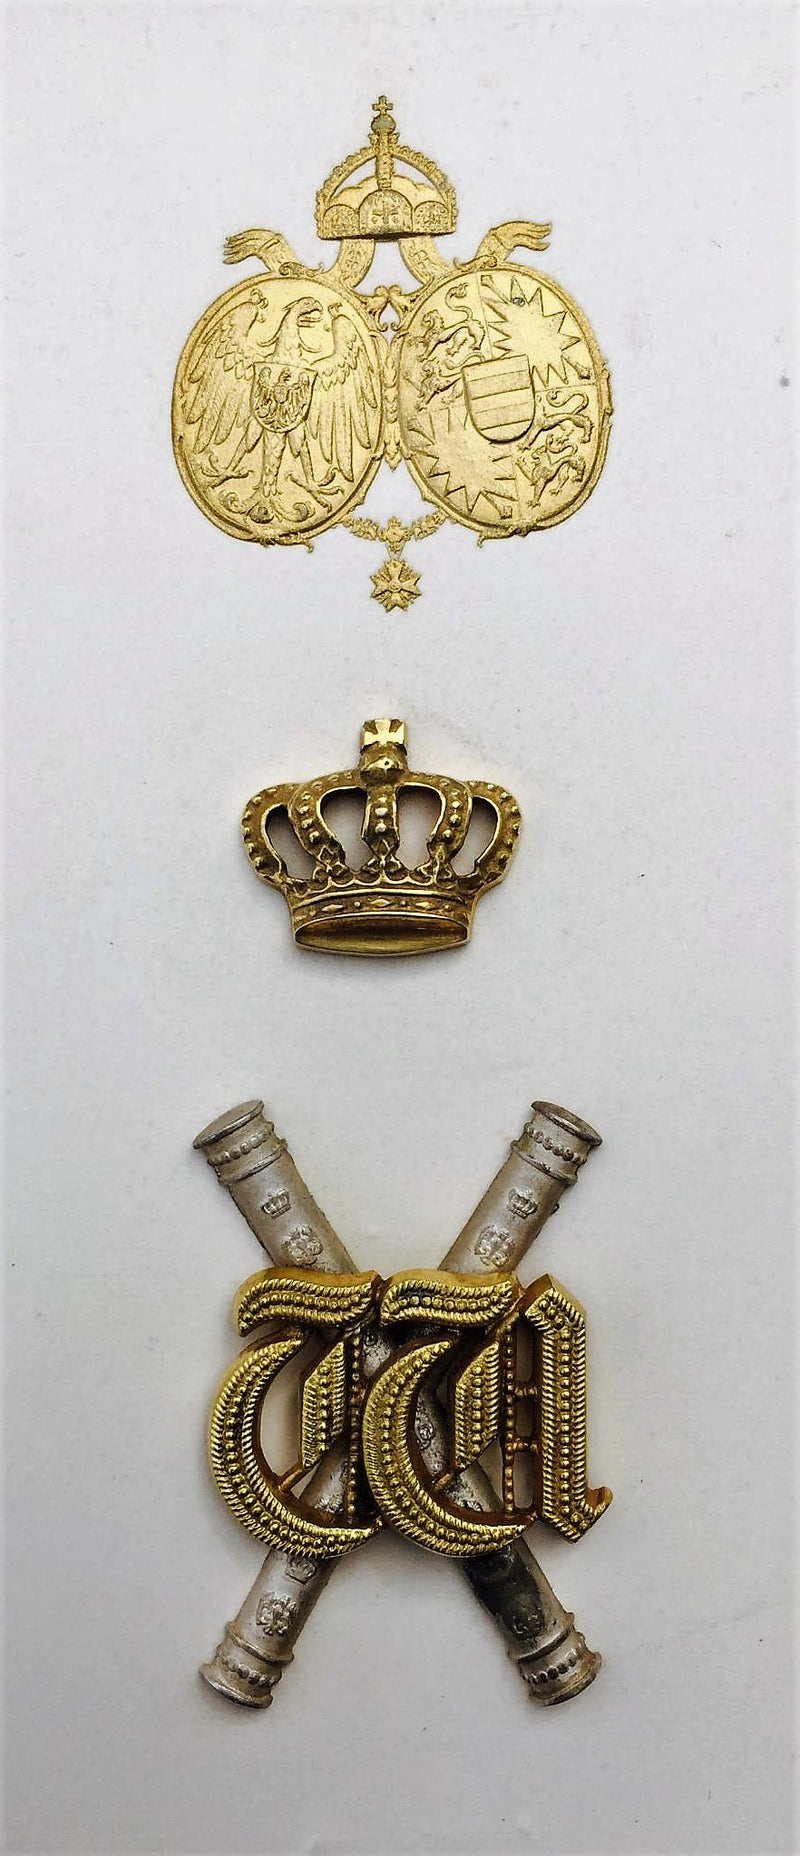 Extremely rare personal rank insignia for KAISER WILHELM 11 on original pattern card with embossed gilt cypher of the Emperor and Empress.